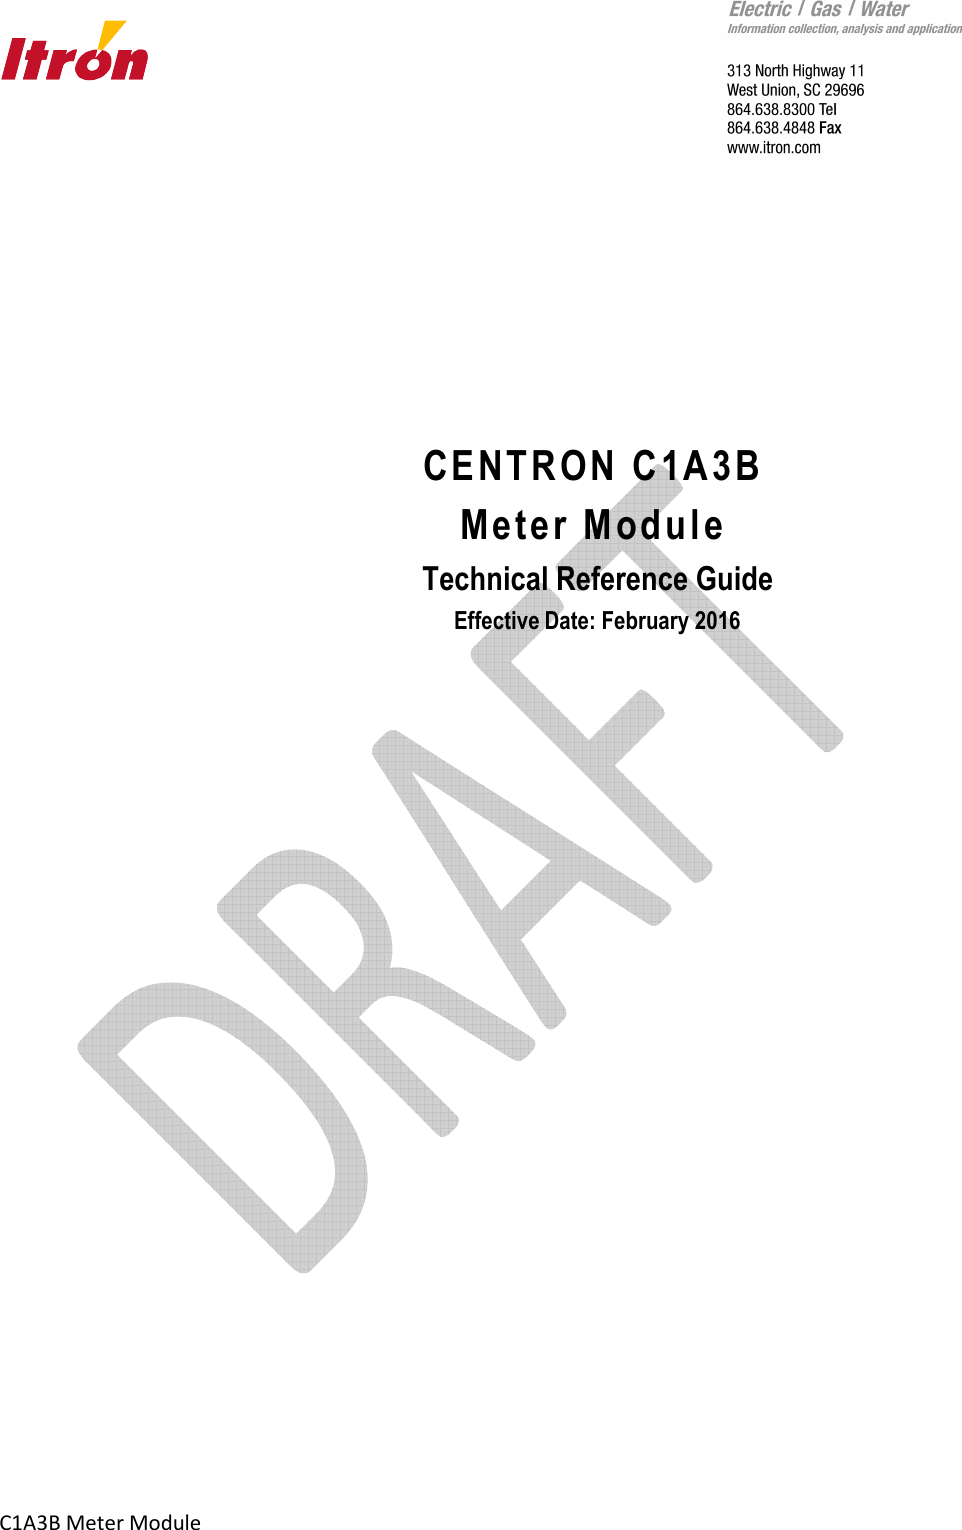       C1A3B Meter Module             CENTRON C1A3B Meter Module  Technical Reference Guide  Effective Date: February 2016     